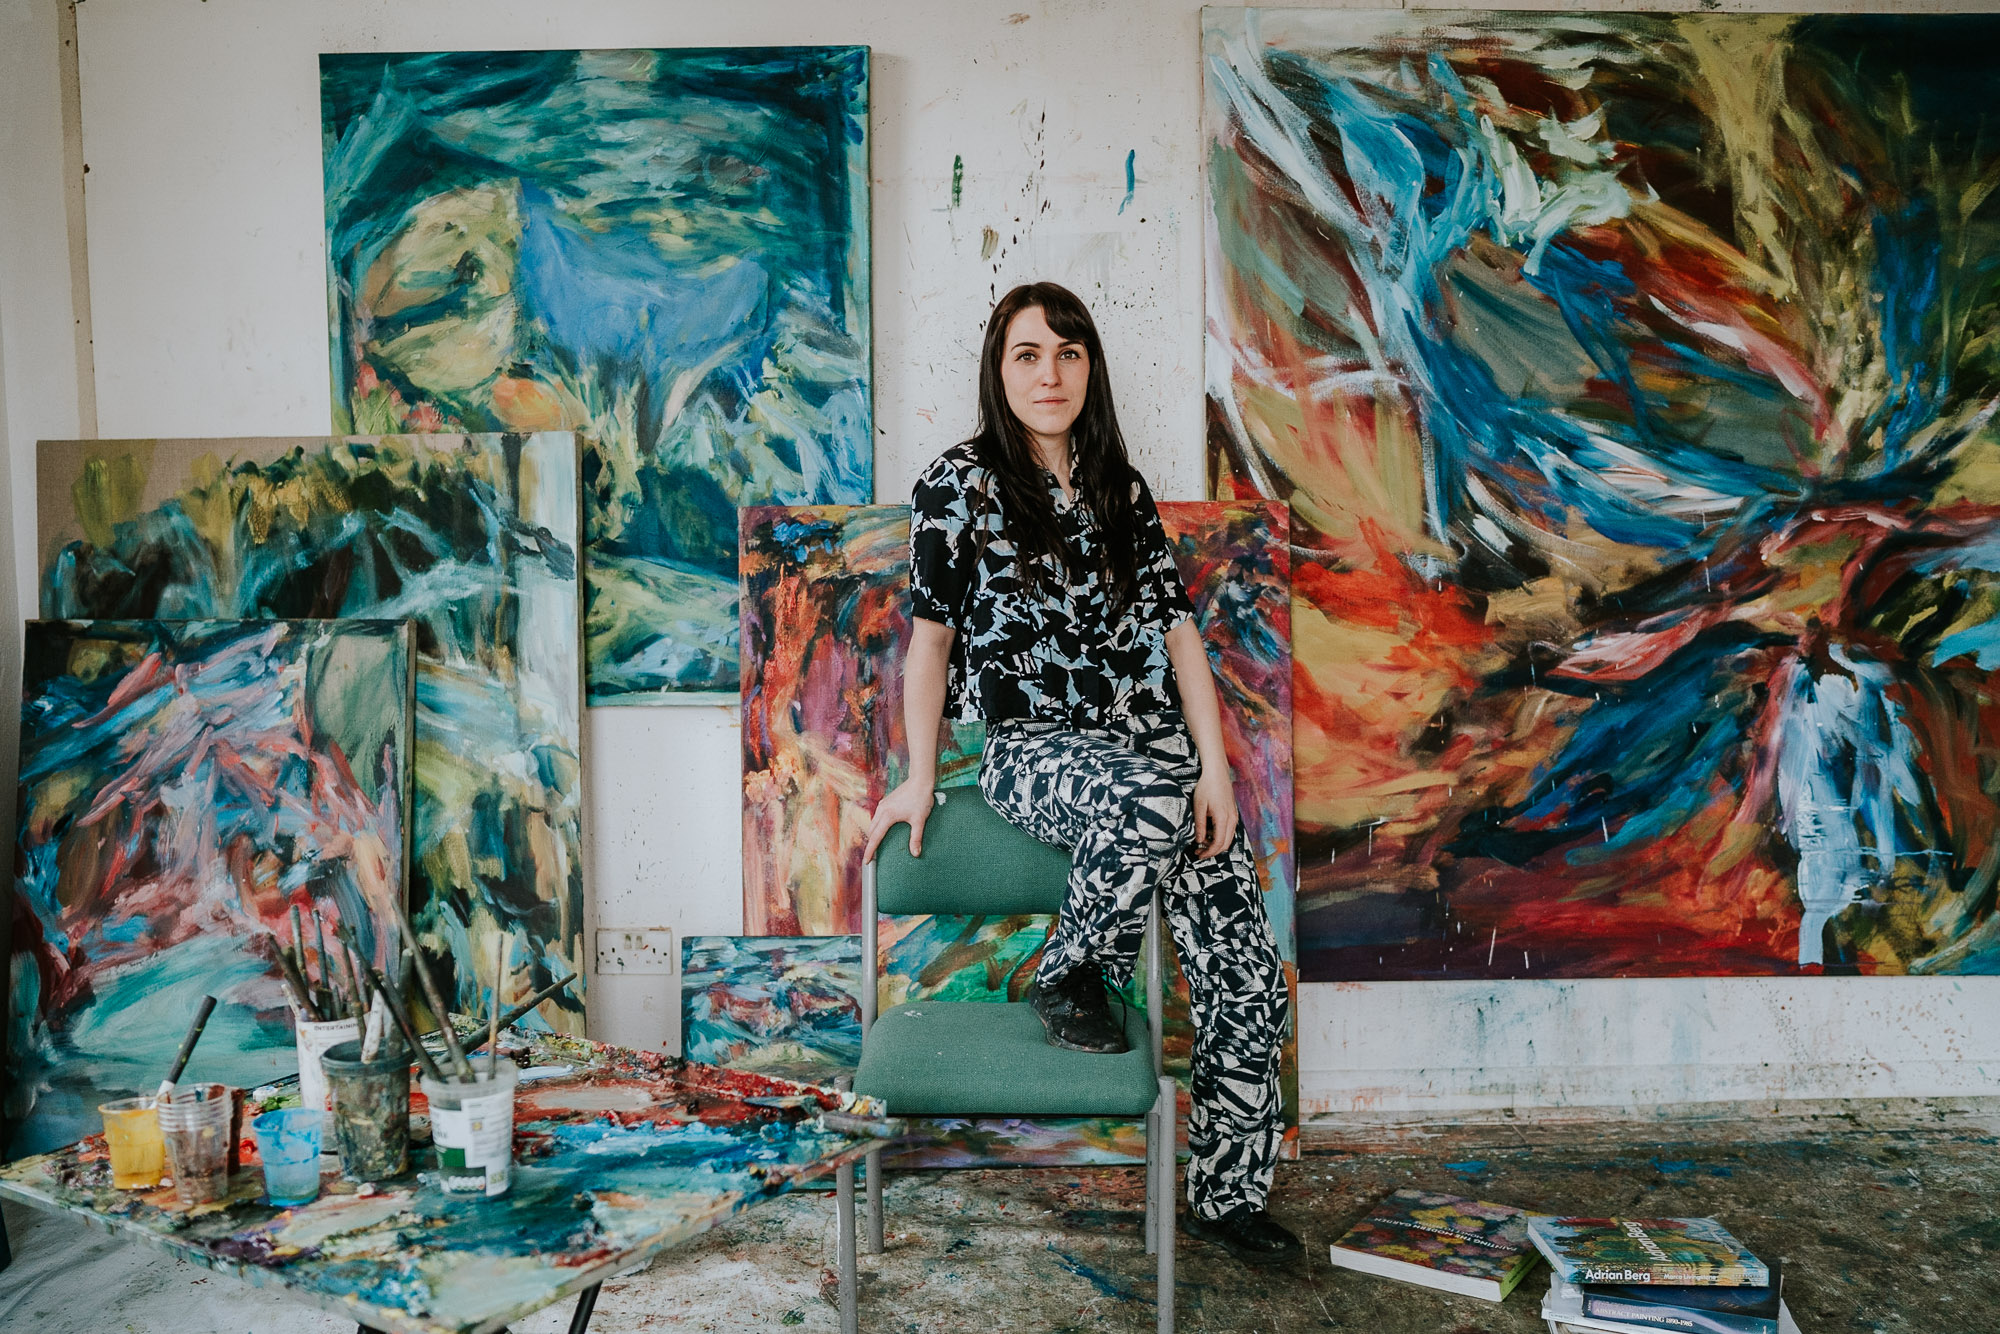 Portriat and brand photography of painter Sarah Cunningham